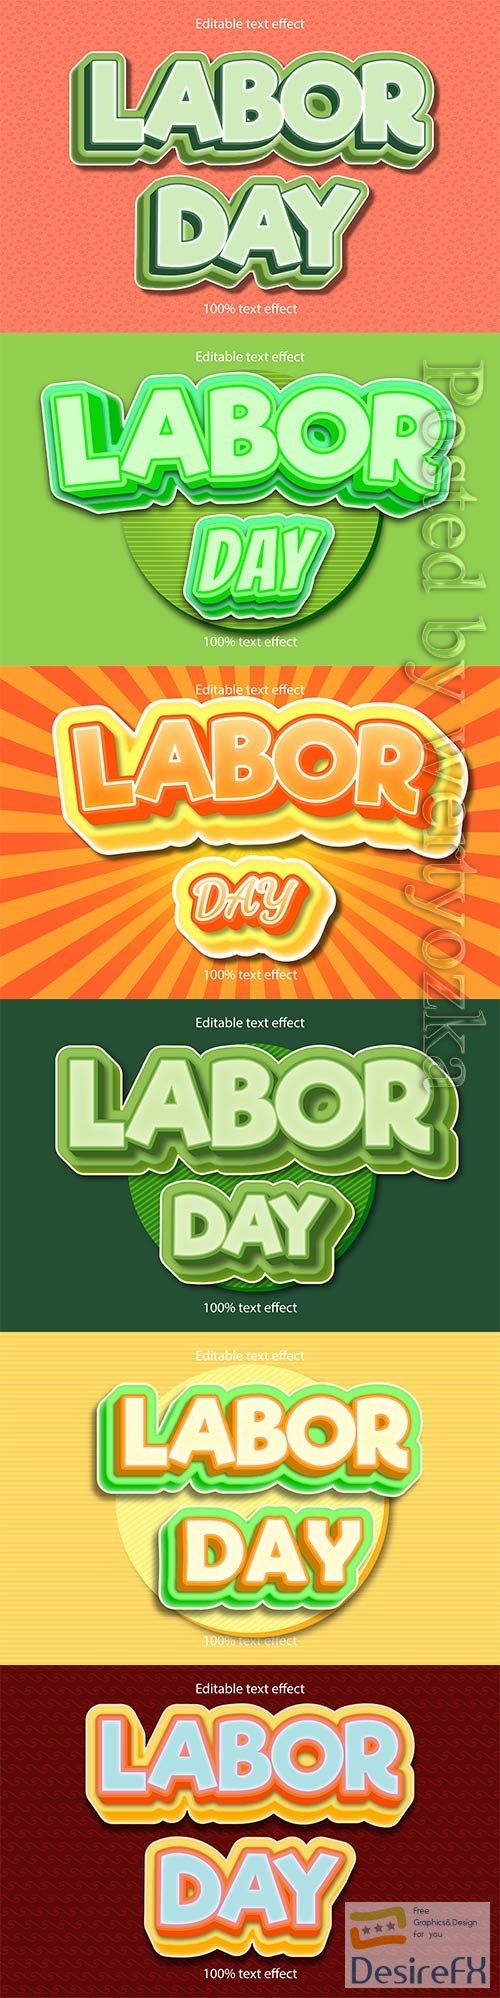 Labor day editable text effect vol 5